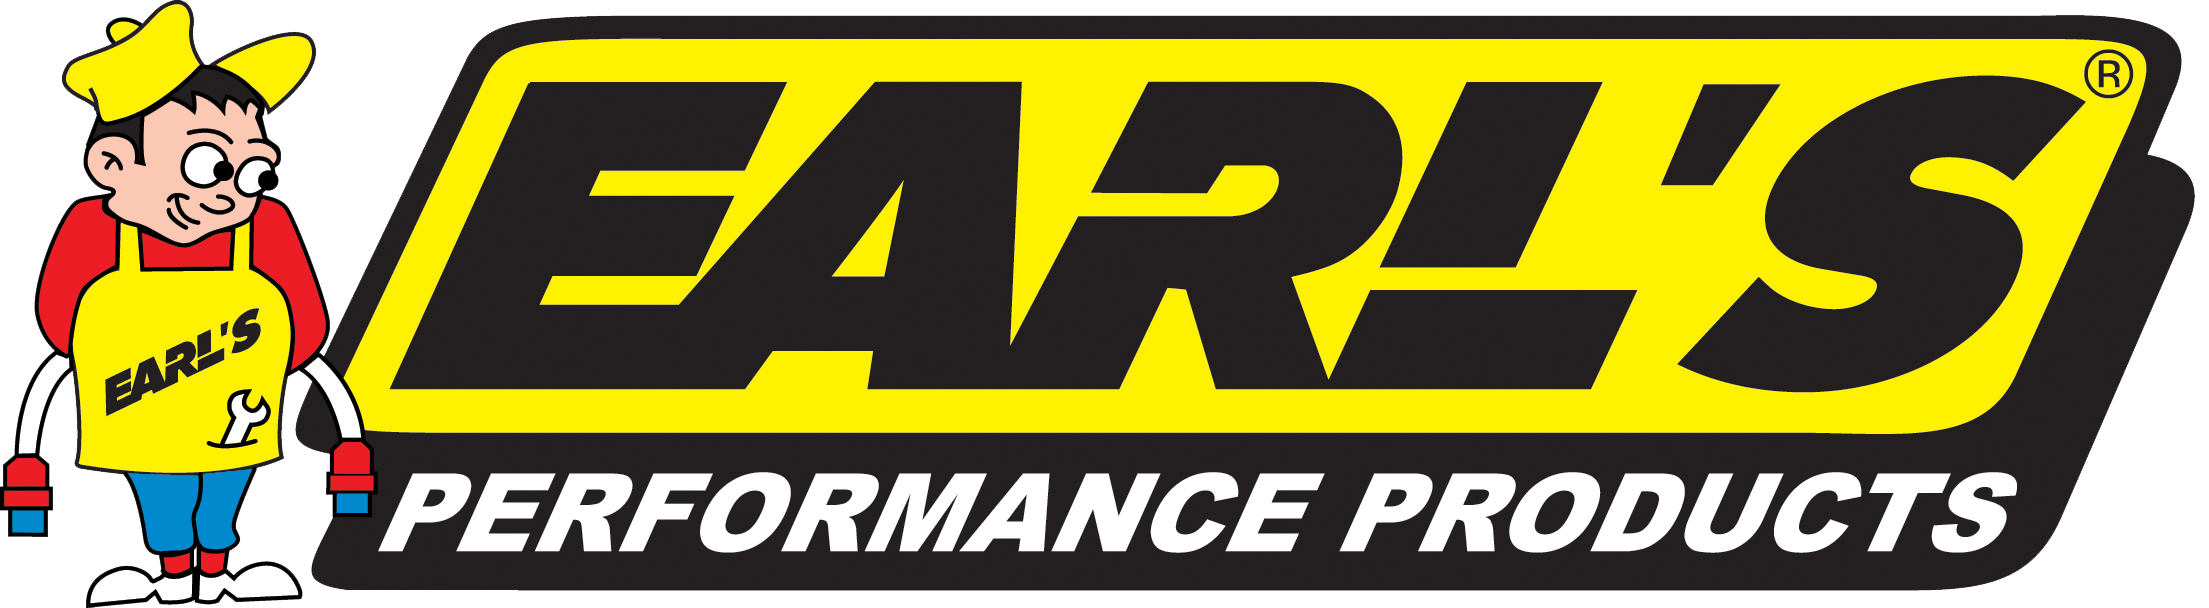 Earl Logo - Earls Performance Products UK - Braided Hose and Fittings